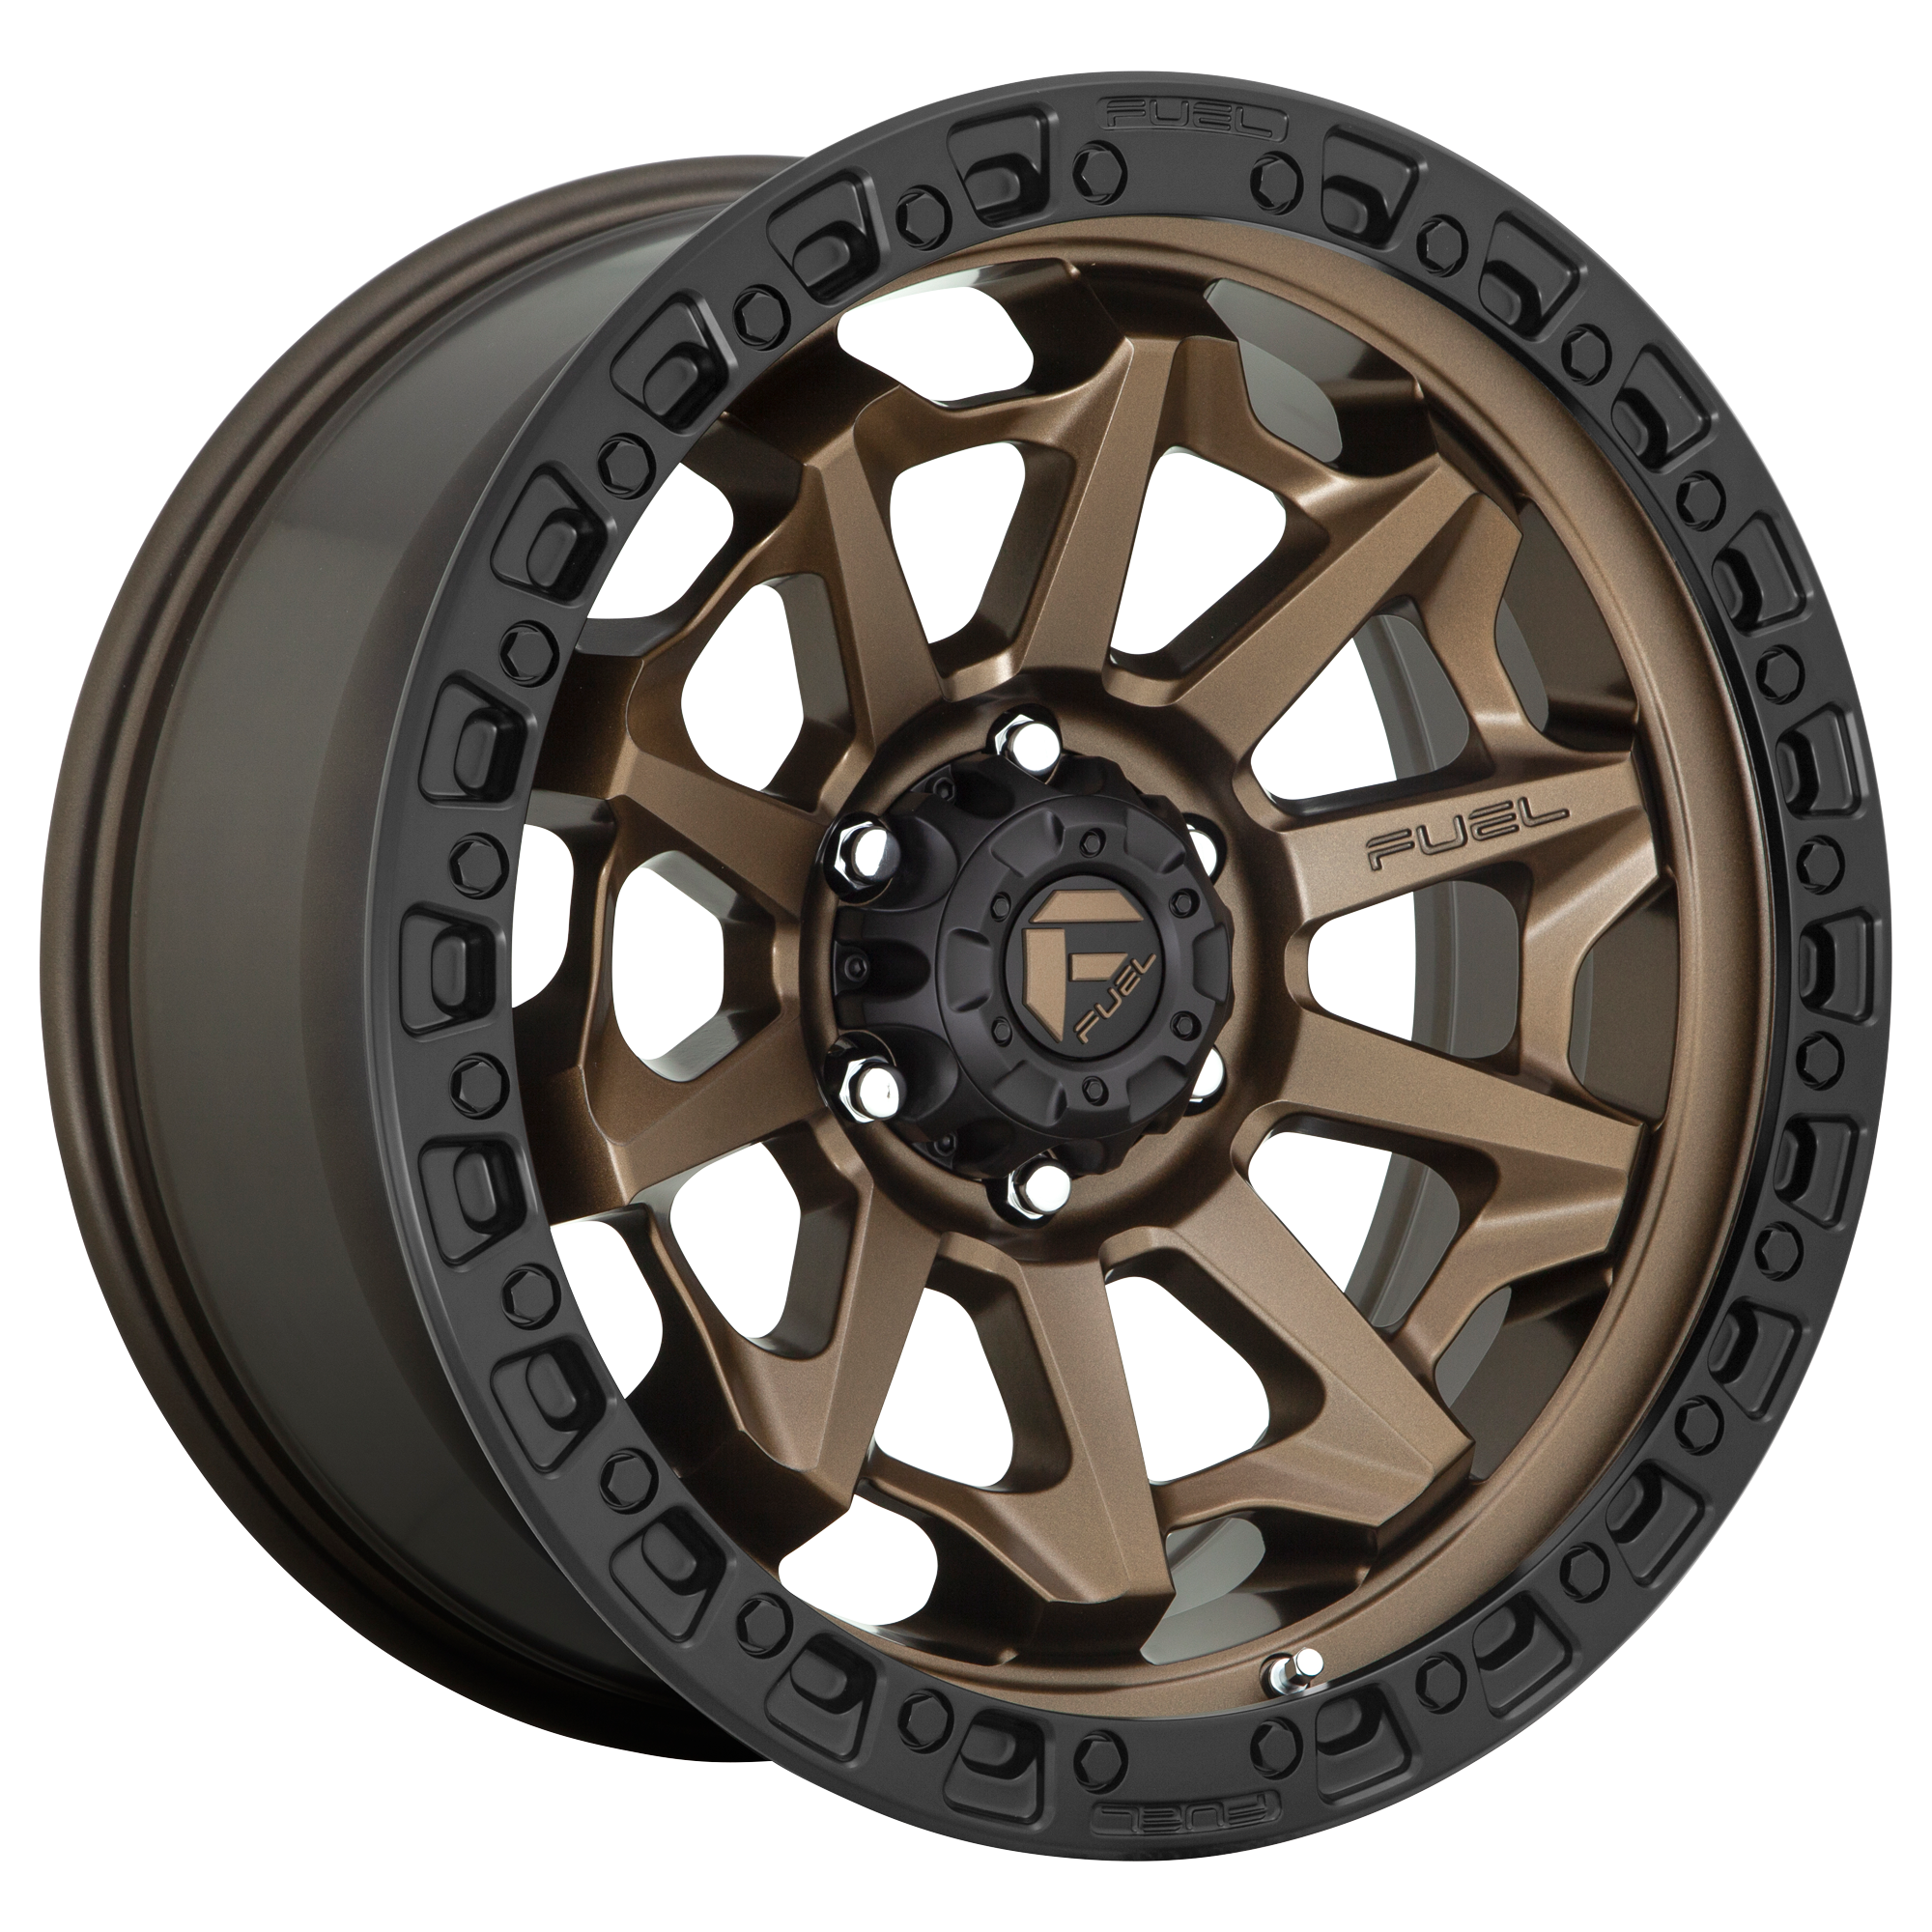 COVERT 20x9 5x150.00 MATTE BRONZE BLACK BEAD RING (20 mm) - Tires and Engine Performance